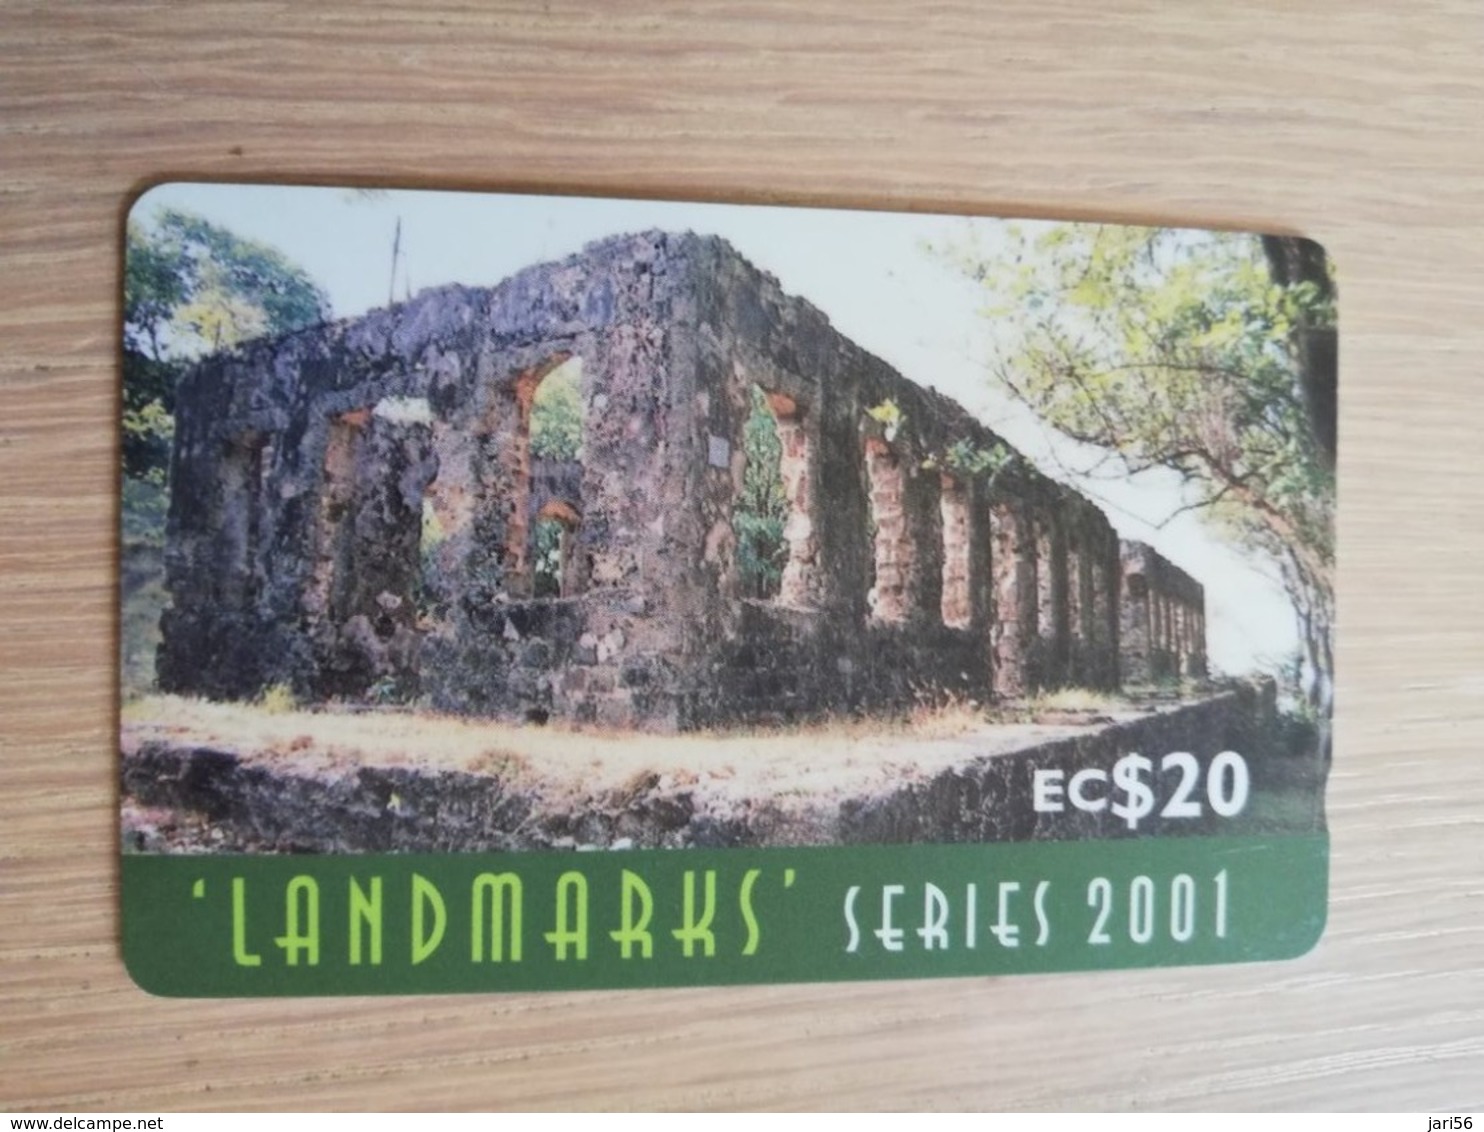 ST LUCIA    $ 20   CABLE & WIRELESS  STL-337F   337CSLF  LANDMARKS SERIES       Fine Used Card ** 2757** - Saint Lucia